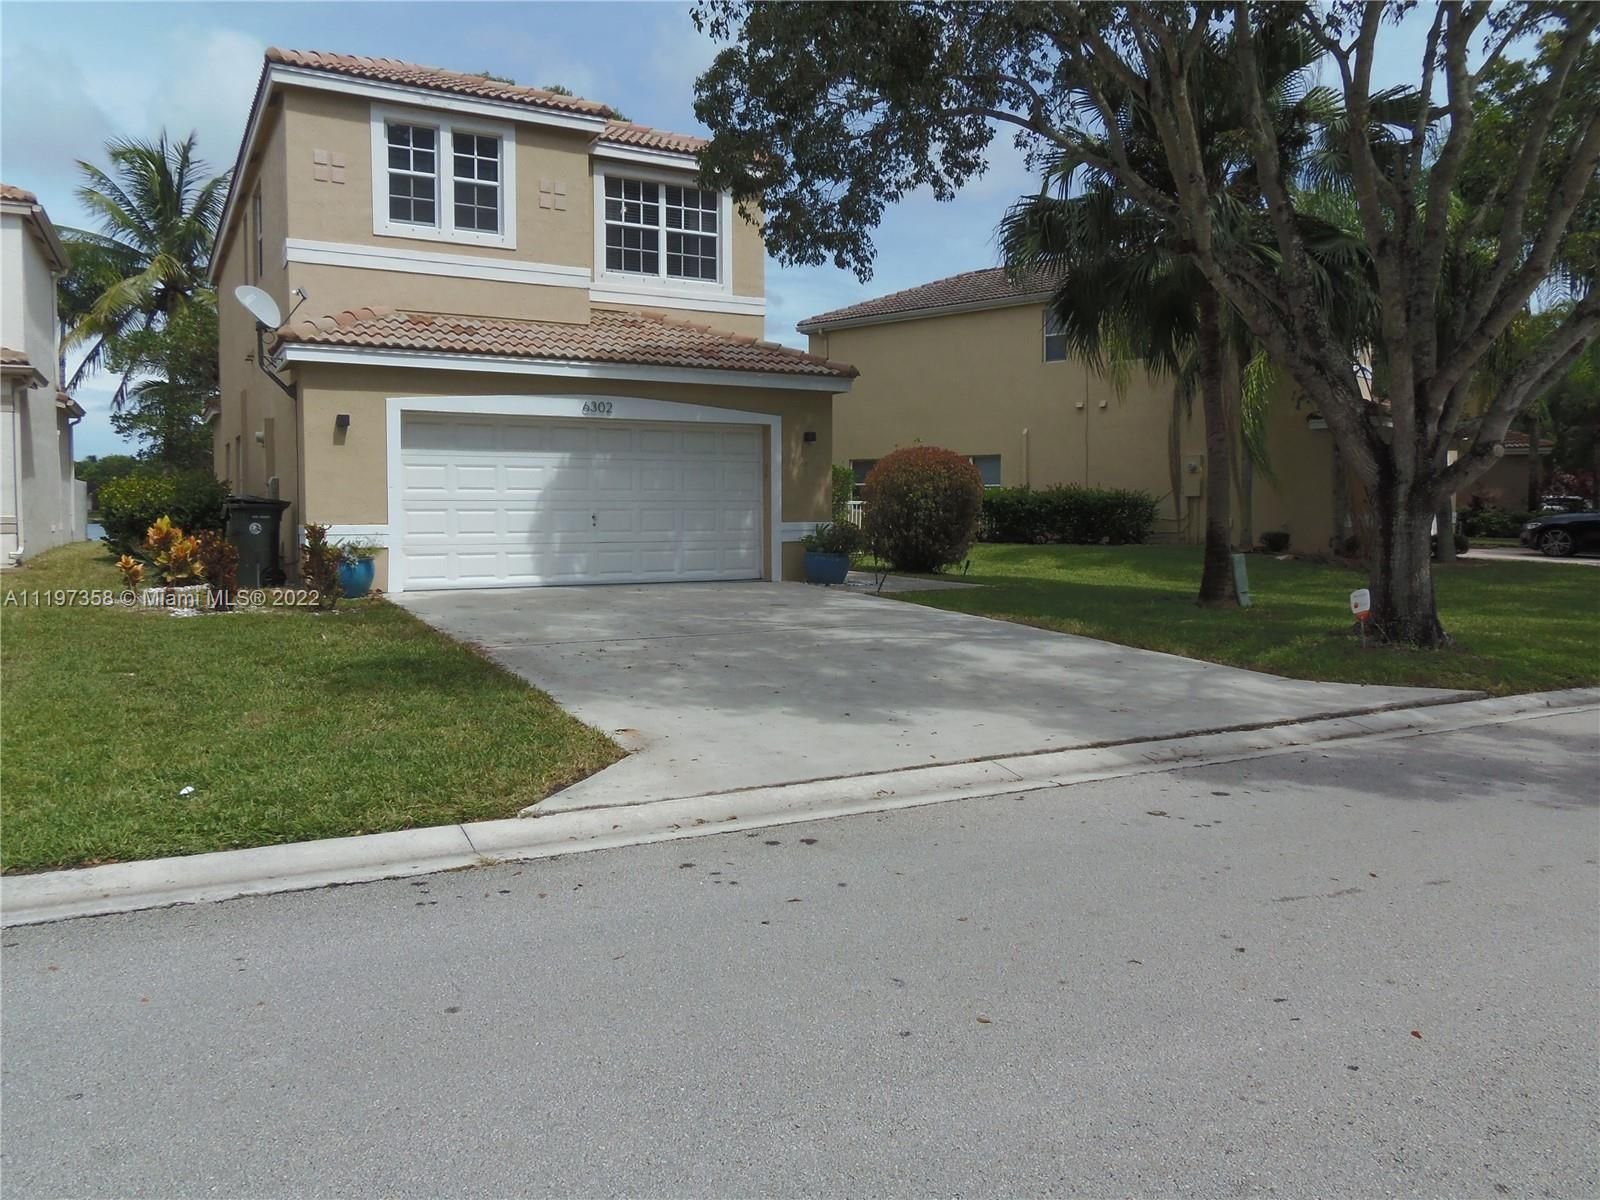 Real estate property located at 6302 40th Ave, Broward County, Coconut Creek, FL